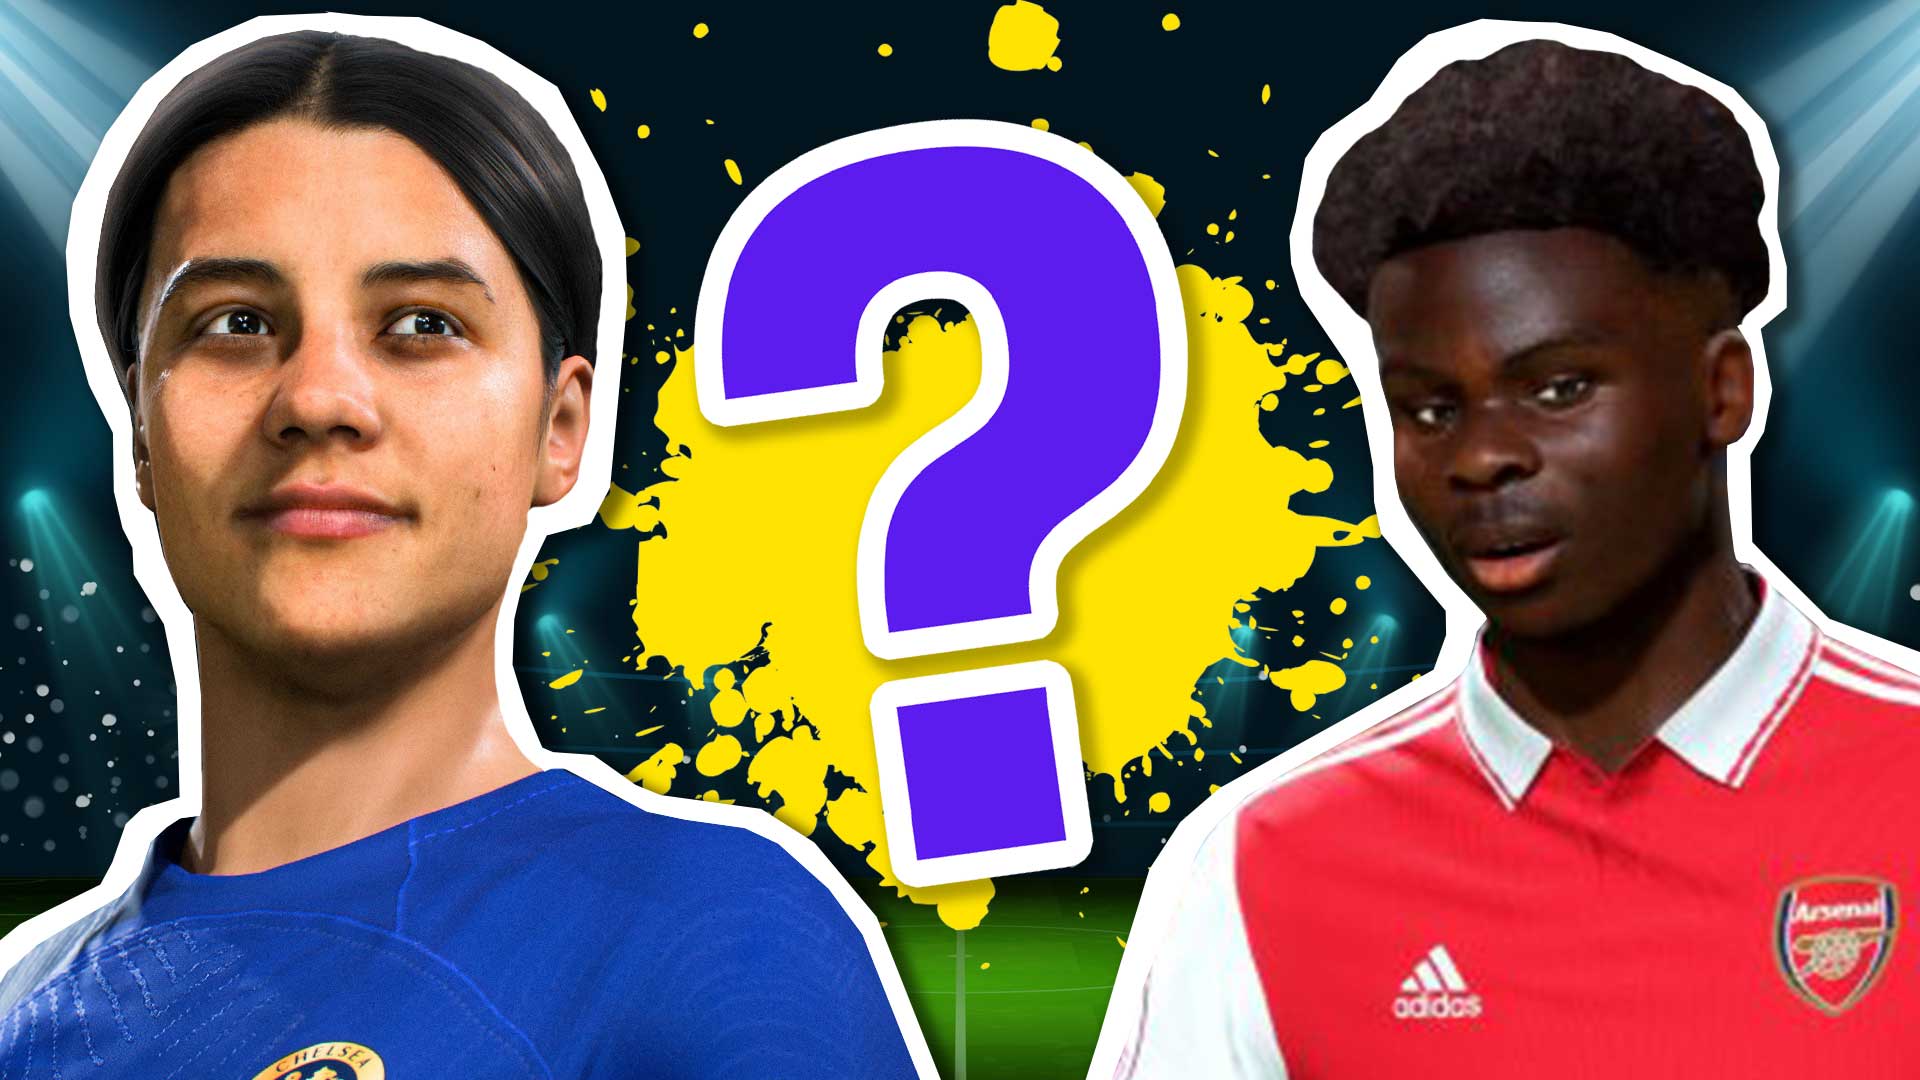 EA Sports FC 24 player personality quiz